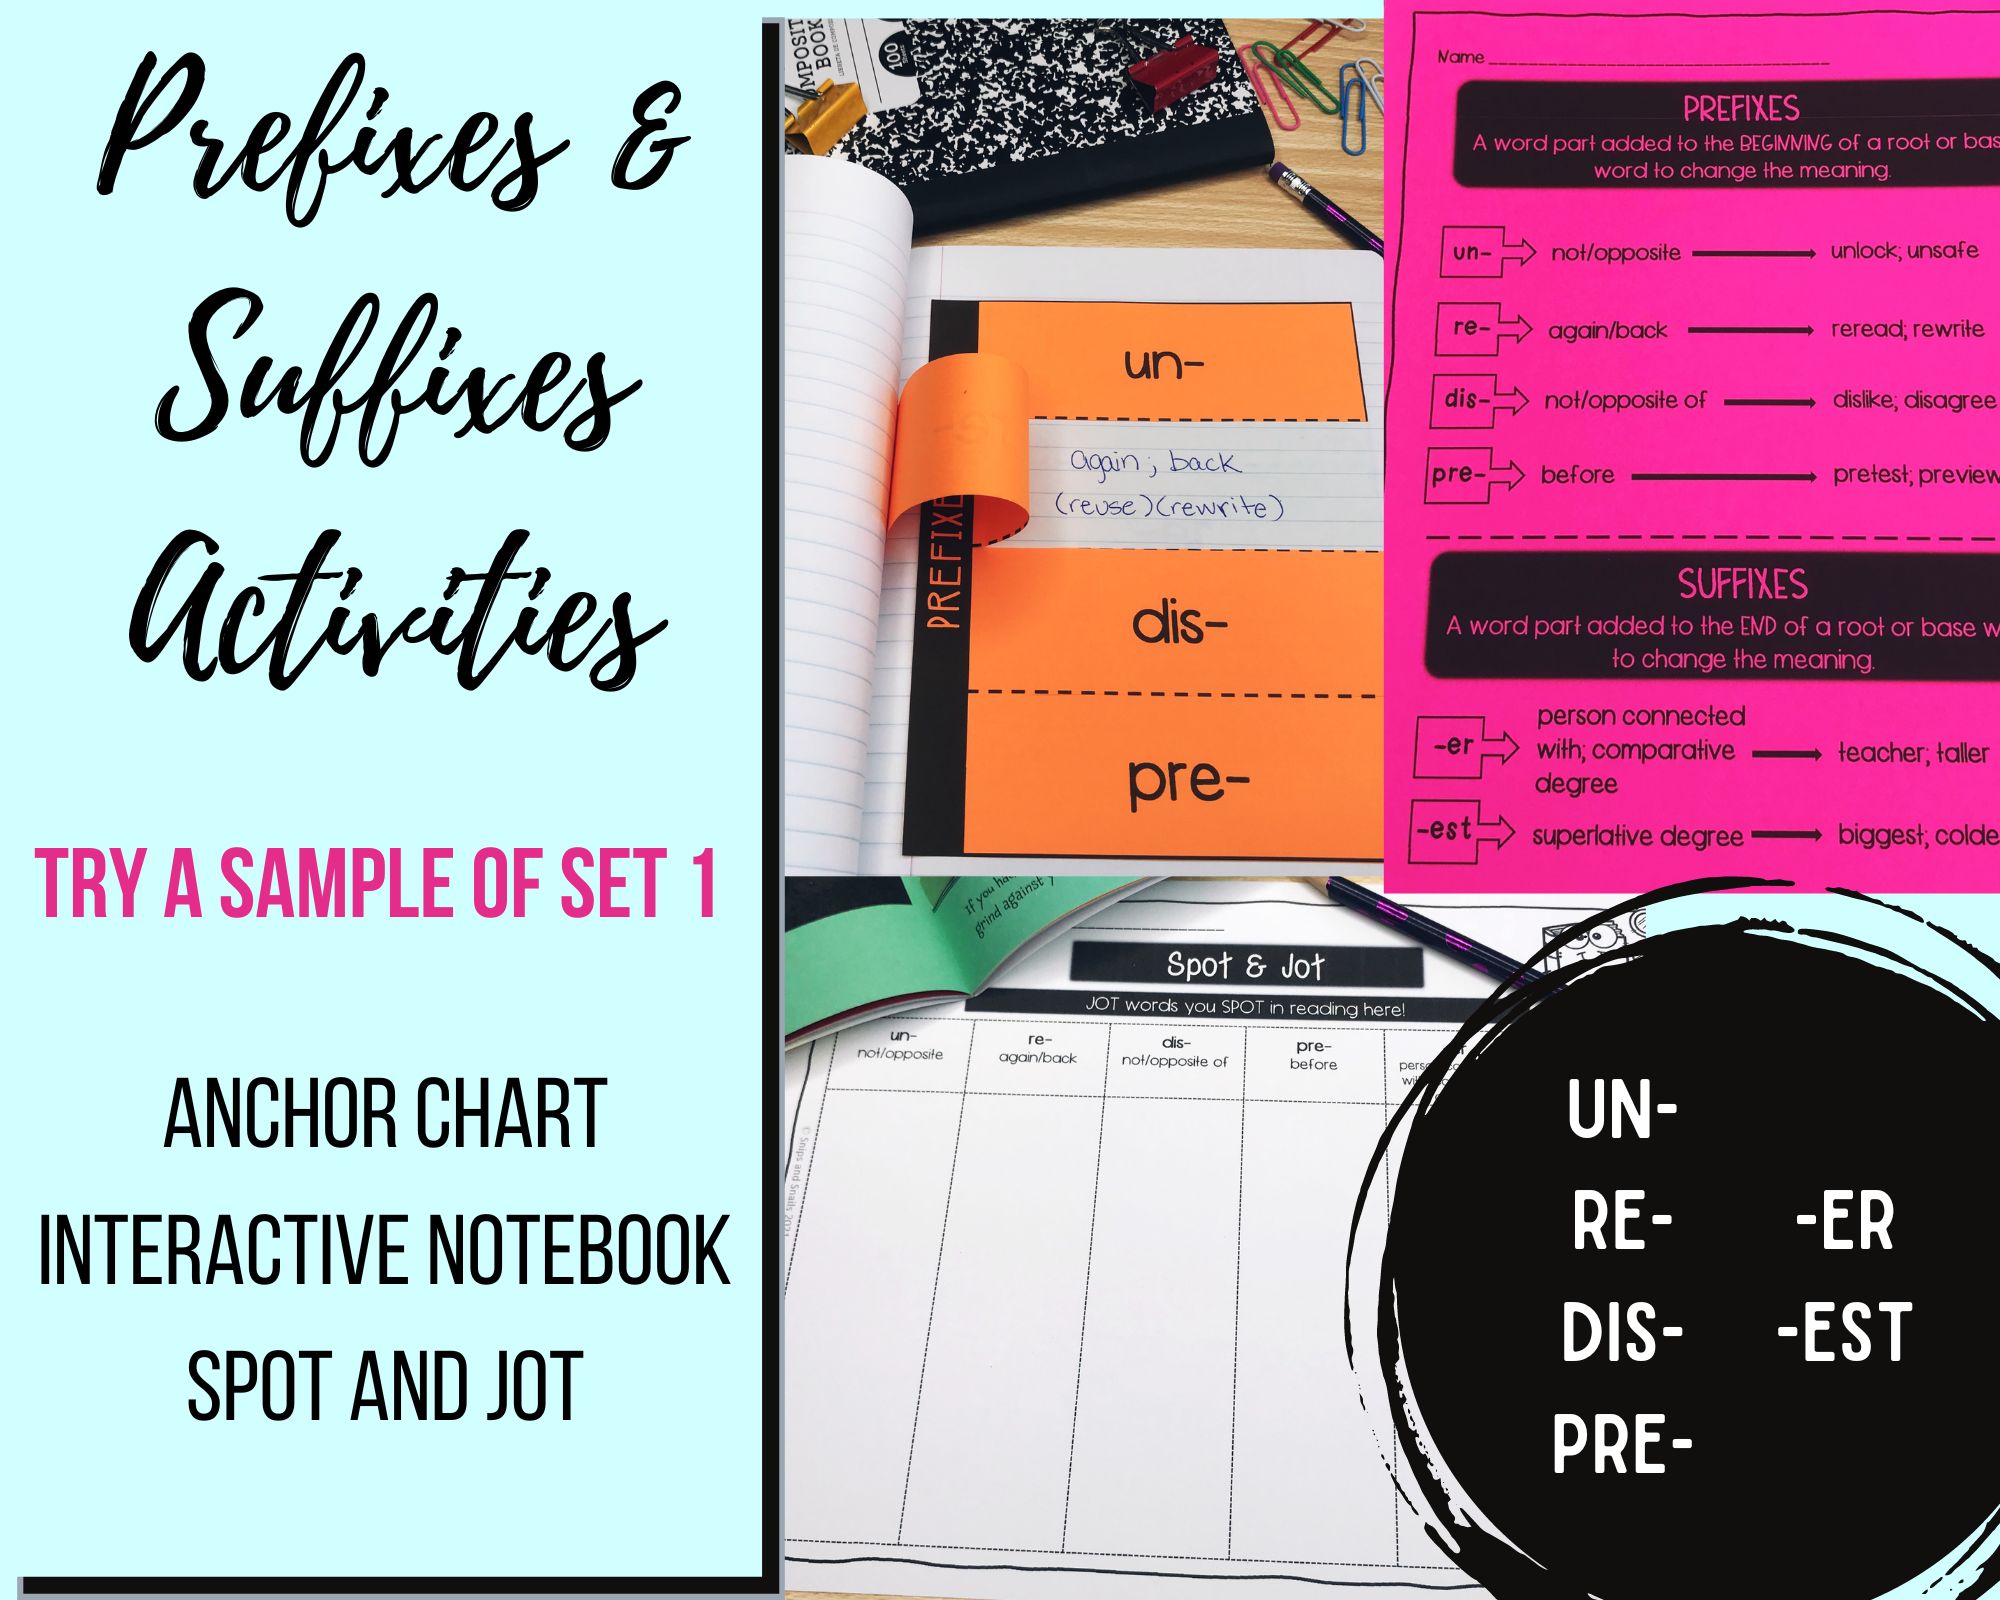 prefix and suffix activities image showing the interactive notebook, reference sheet, and the spot and jot activity